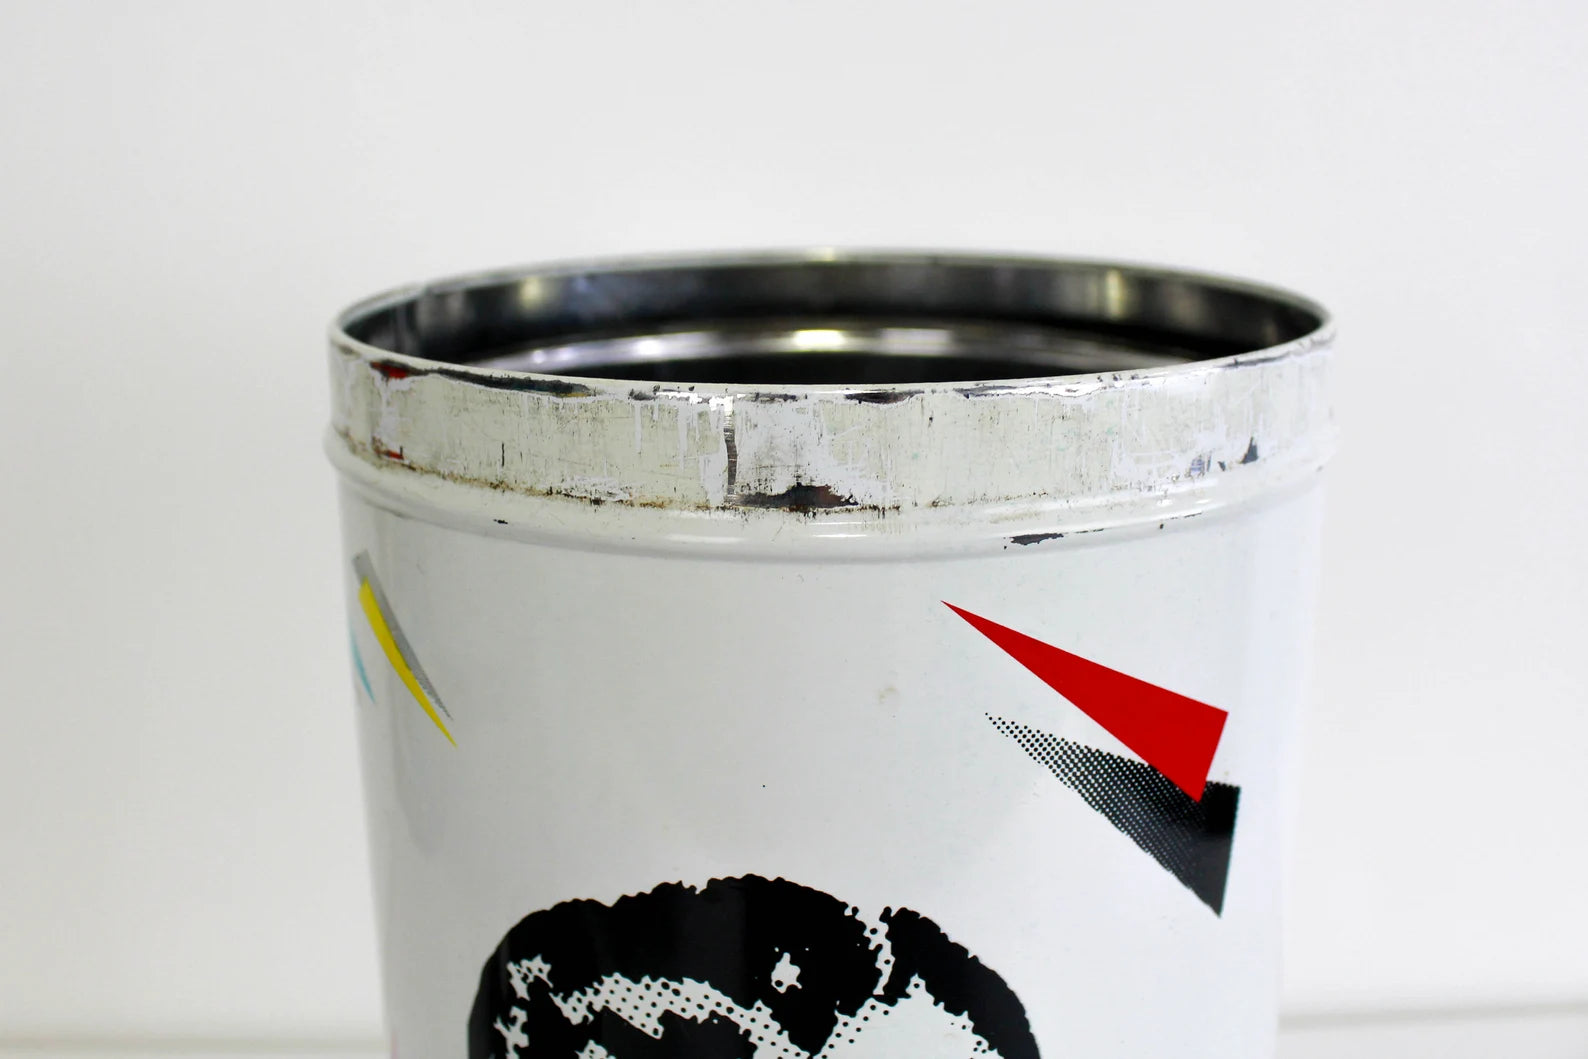 1980s Fiorucci Tin Can, Lichtenstein Style 50s Girl Illustration, Cream and Black, Primary Colors, Vintage Fiorucci Canister